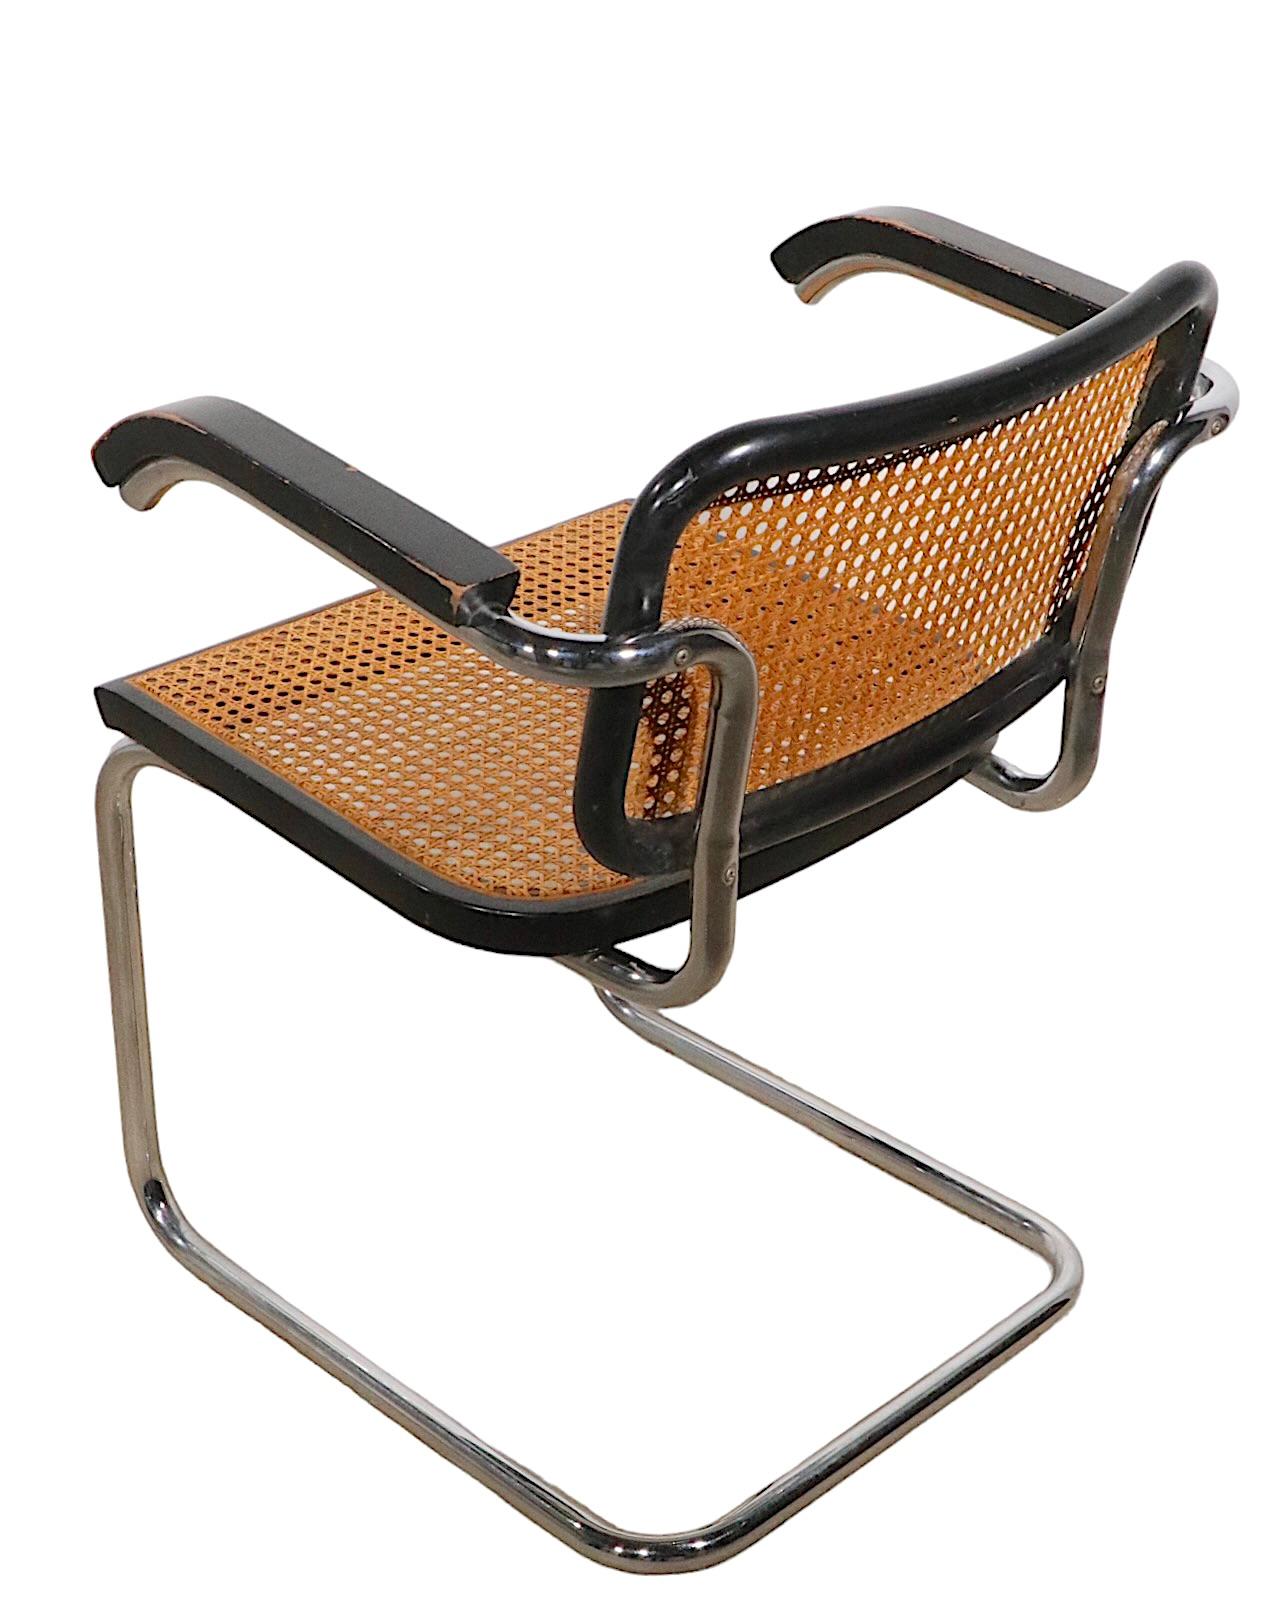 20th Century Chrome and Black Cesca Chair Designed by Marcel Breuer Made in Italy circa 1970s